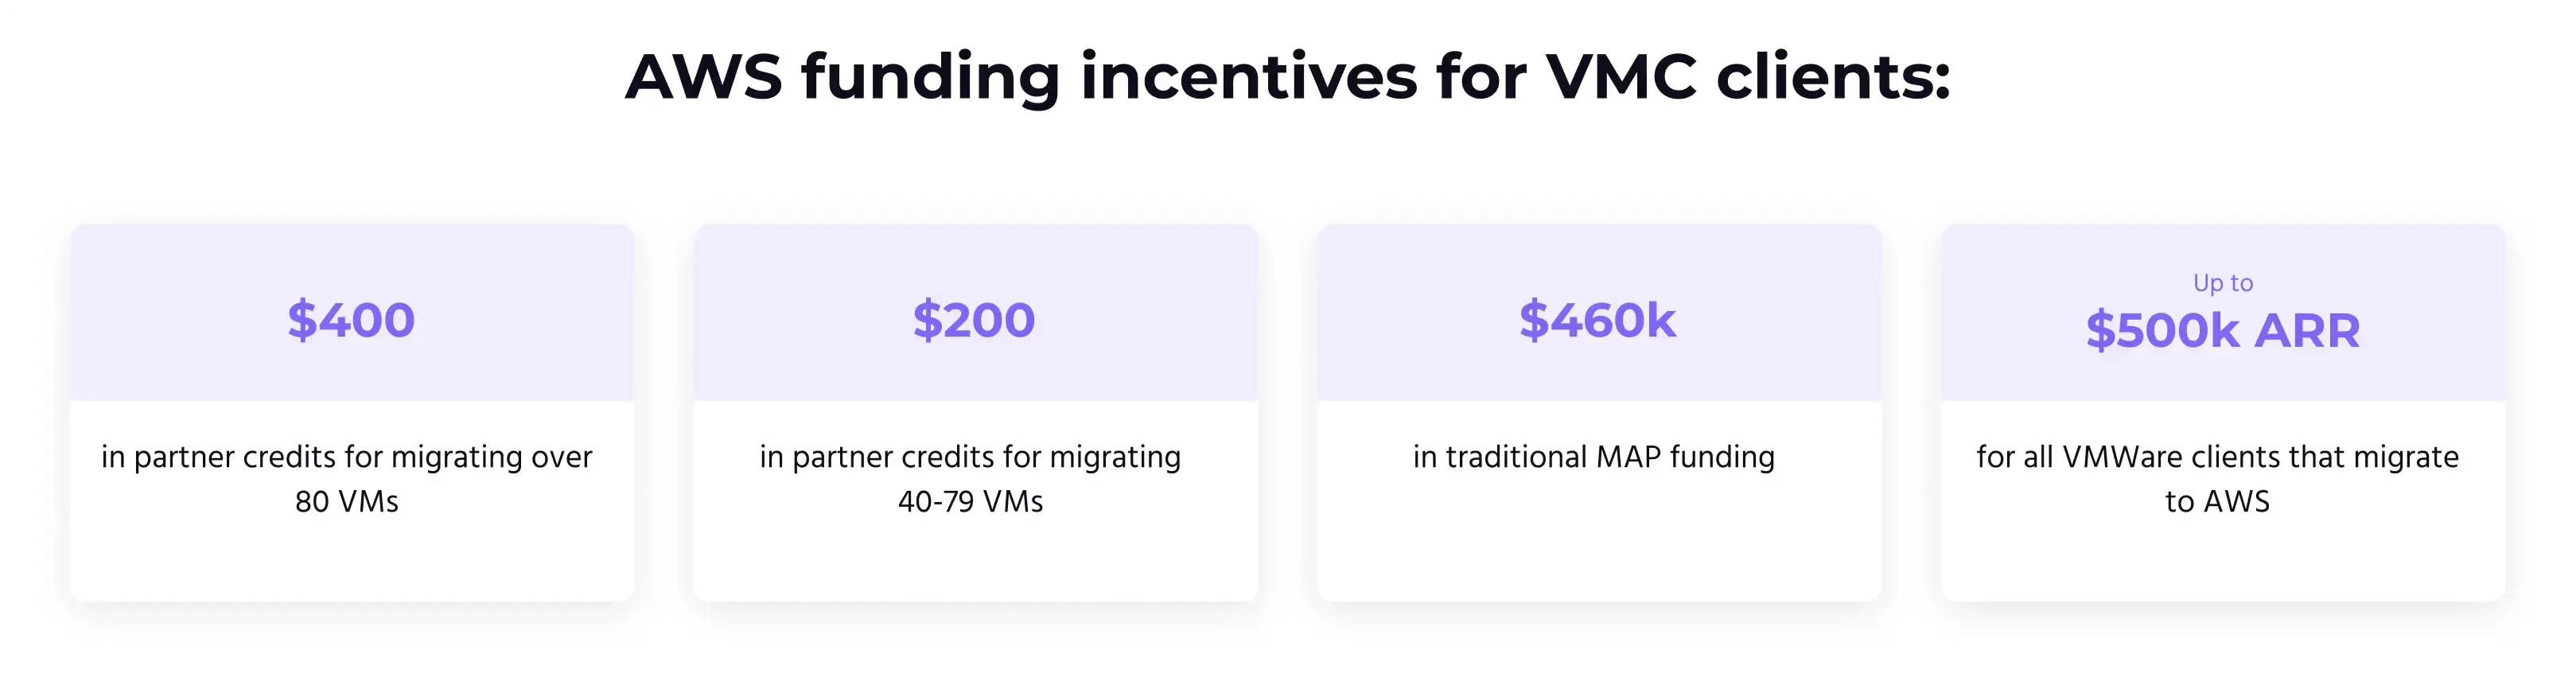 AWS funding incentives for VMWare clients